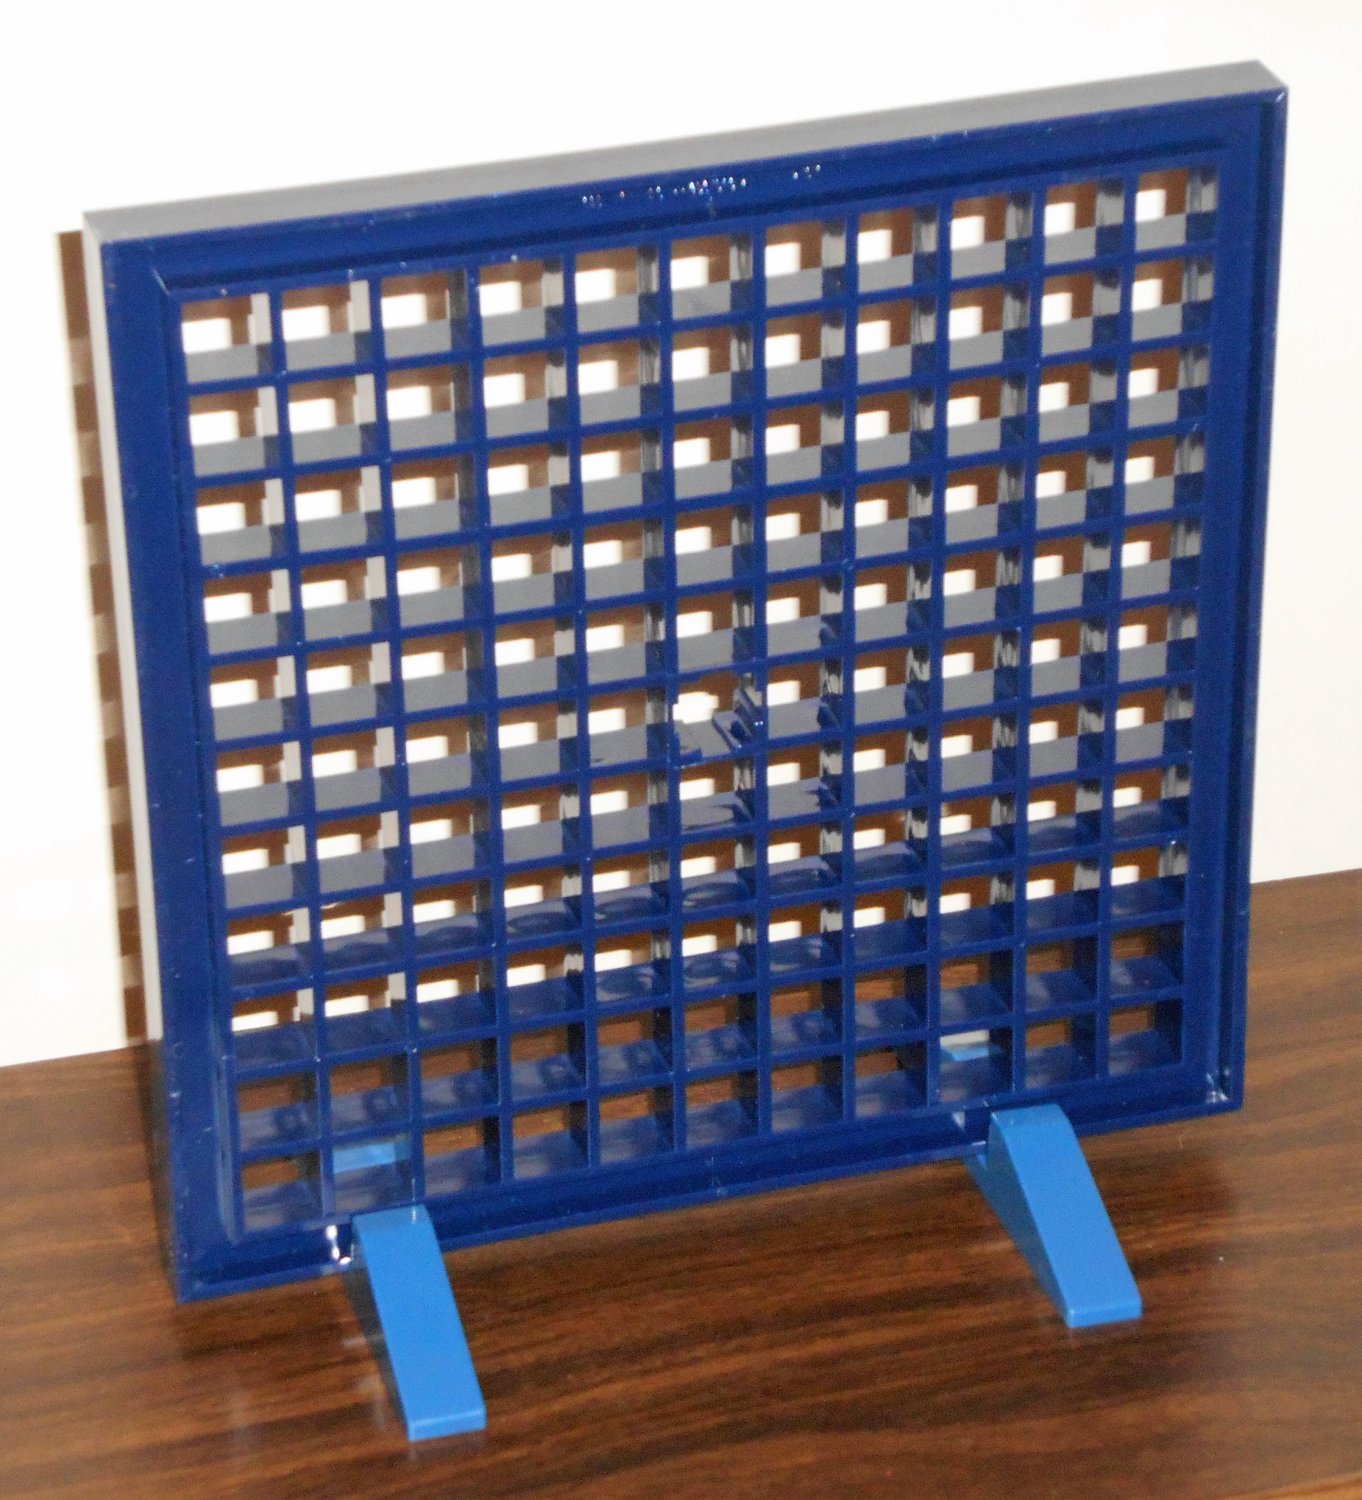 Scrabble RSVP Replacement Plastic Cube Rack with Feet Stand Up Playing Board